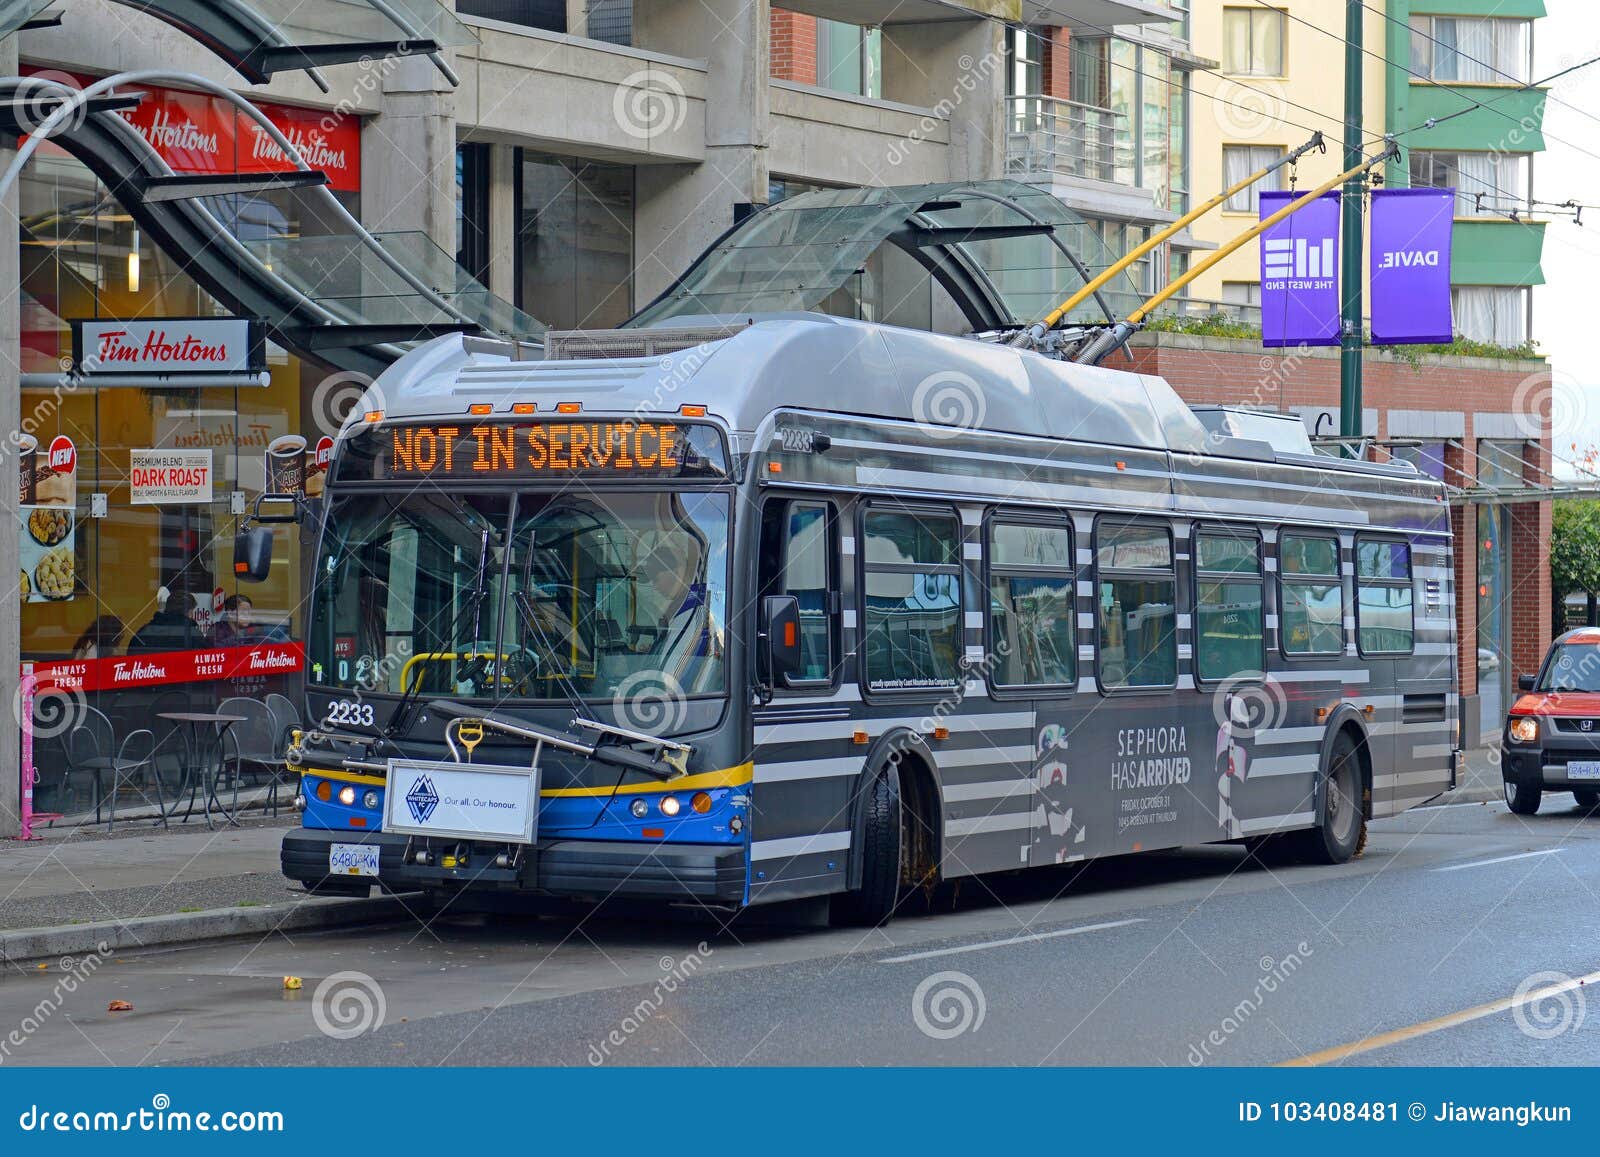 Vancouver Trolley Bus, Vancouver, BC, Canada Editorial Photo - Image of ...